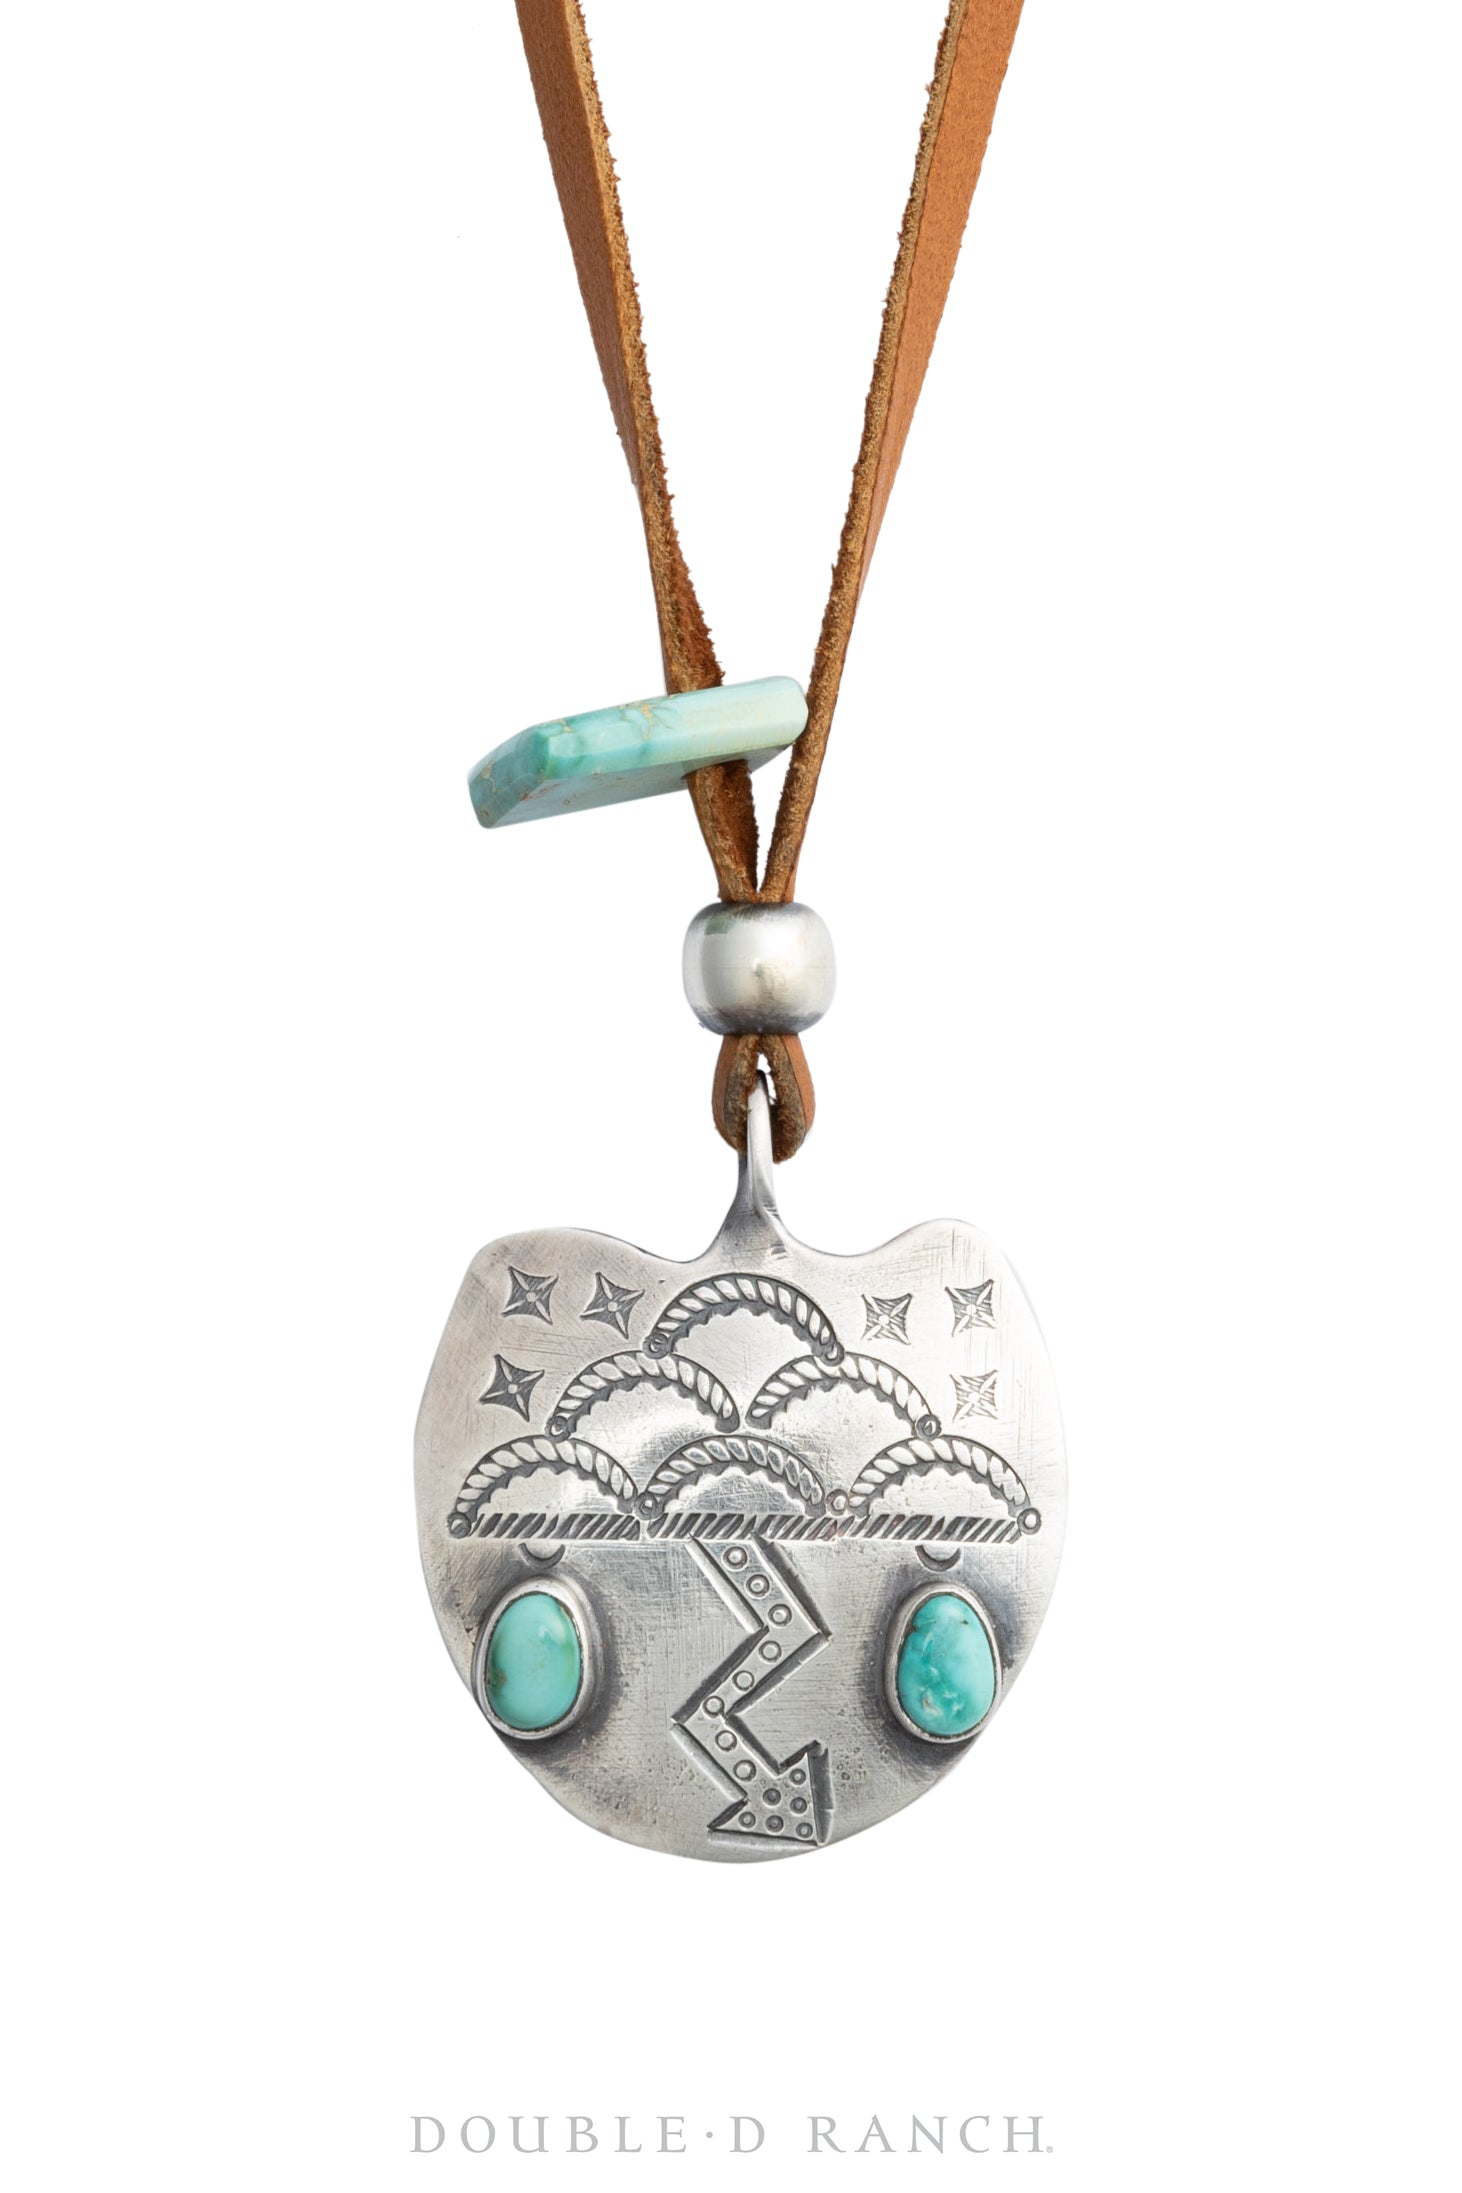 Necklace, Leather Thong, Turquoise, Jesse Robbins Hallmark, Artisan, Contemporary, 1885